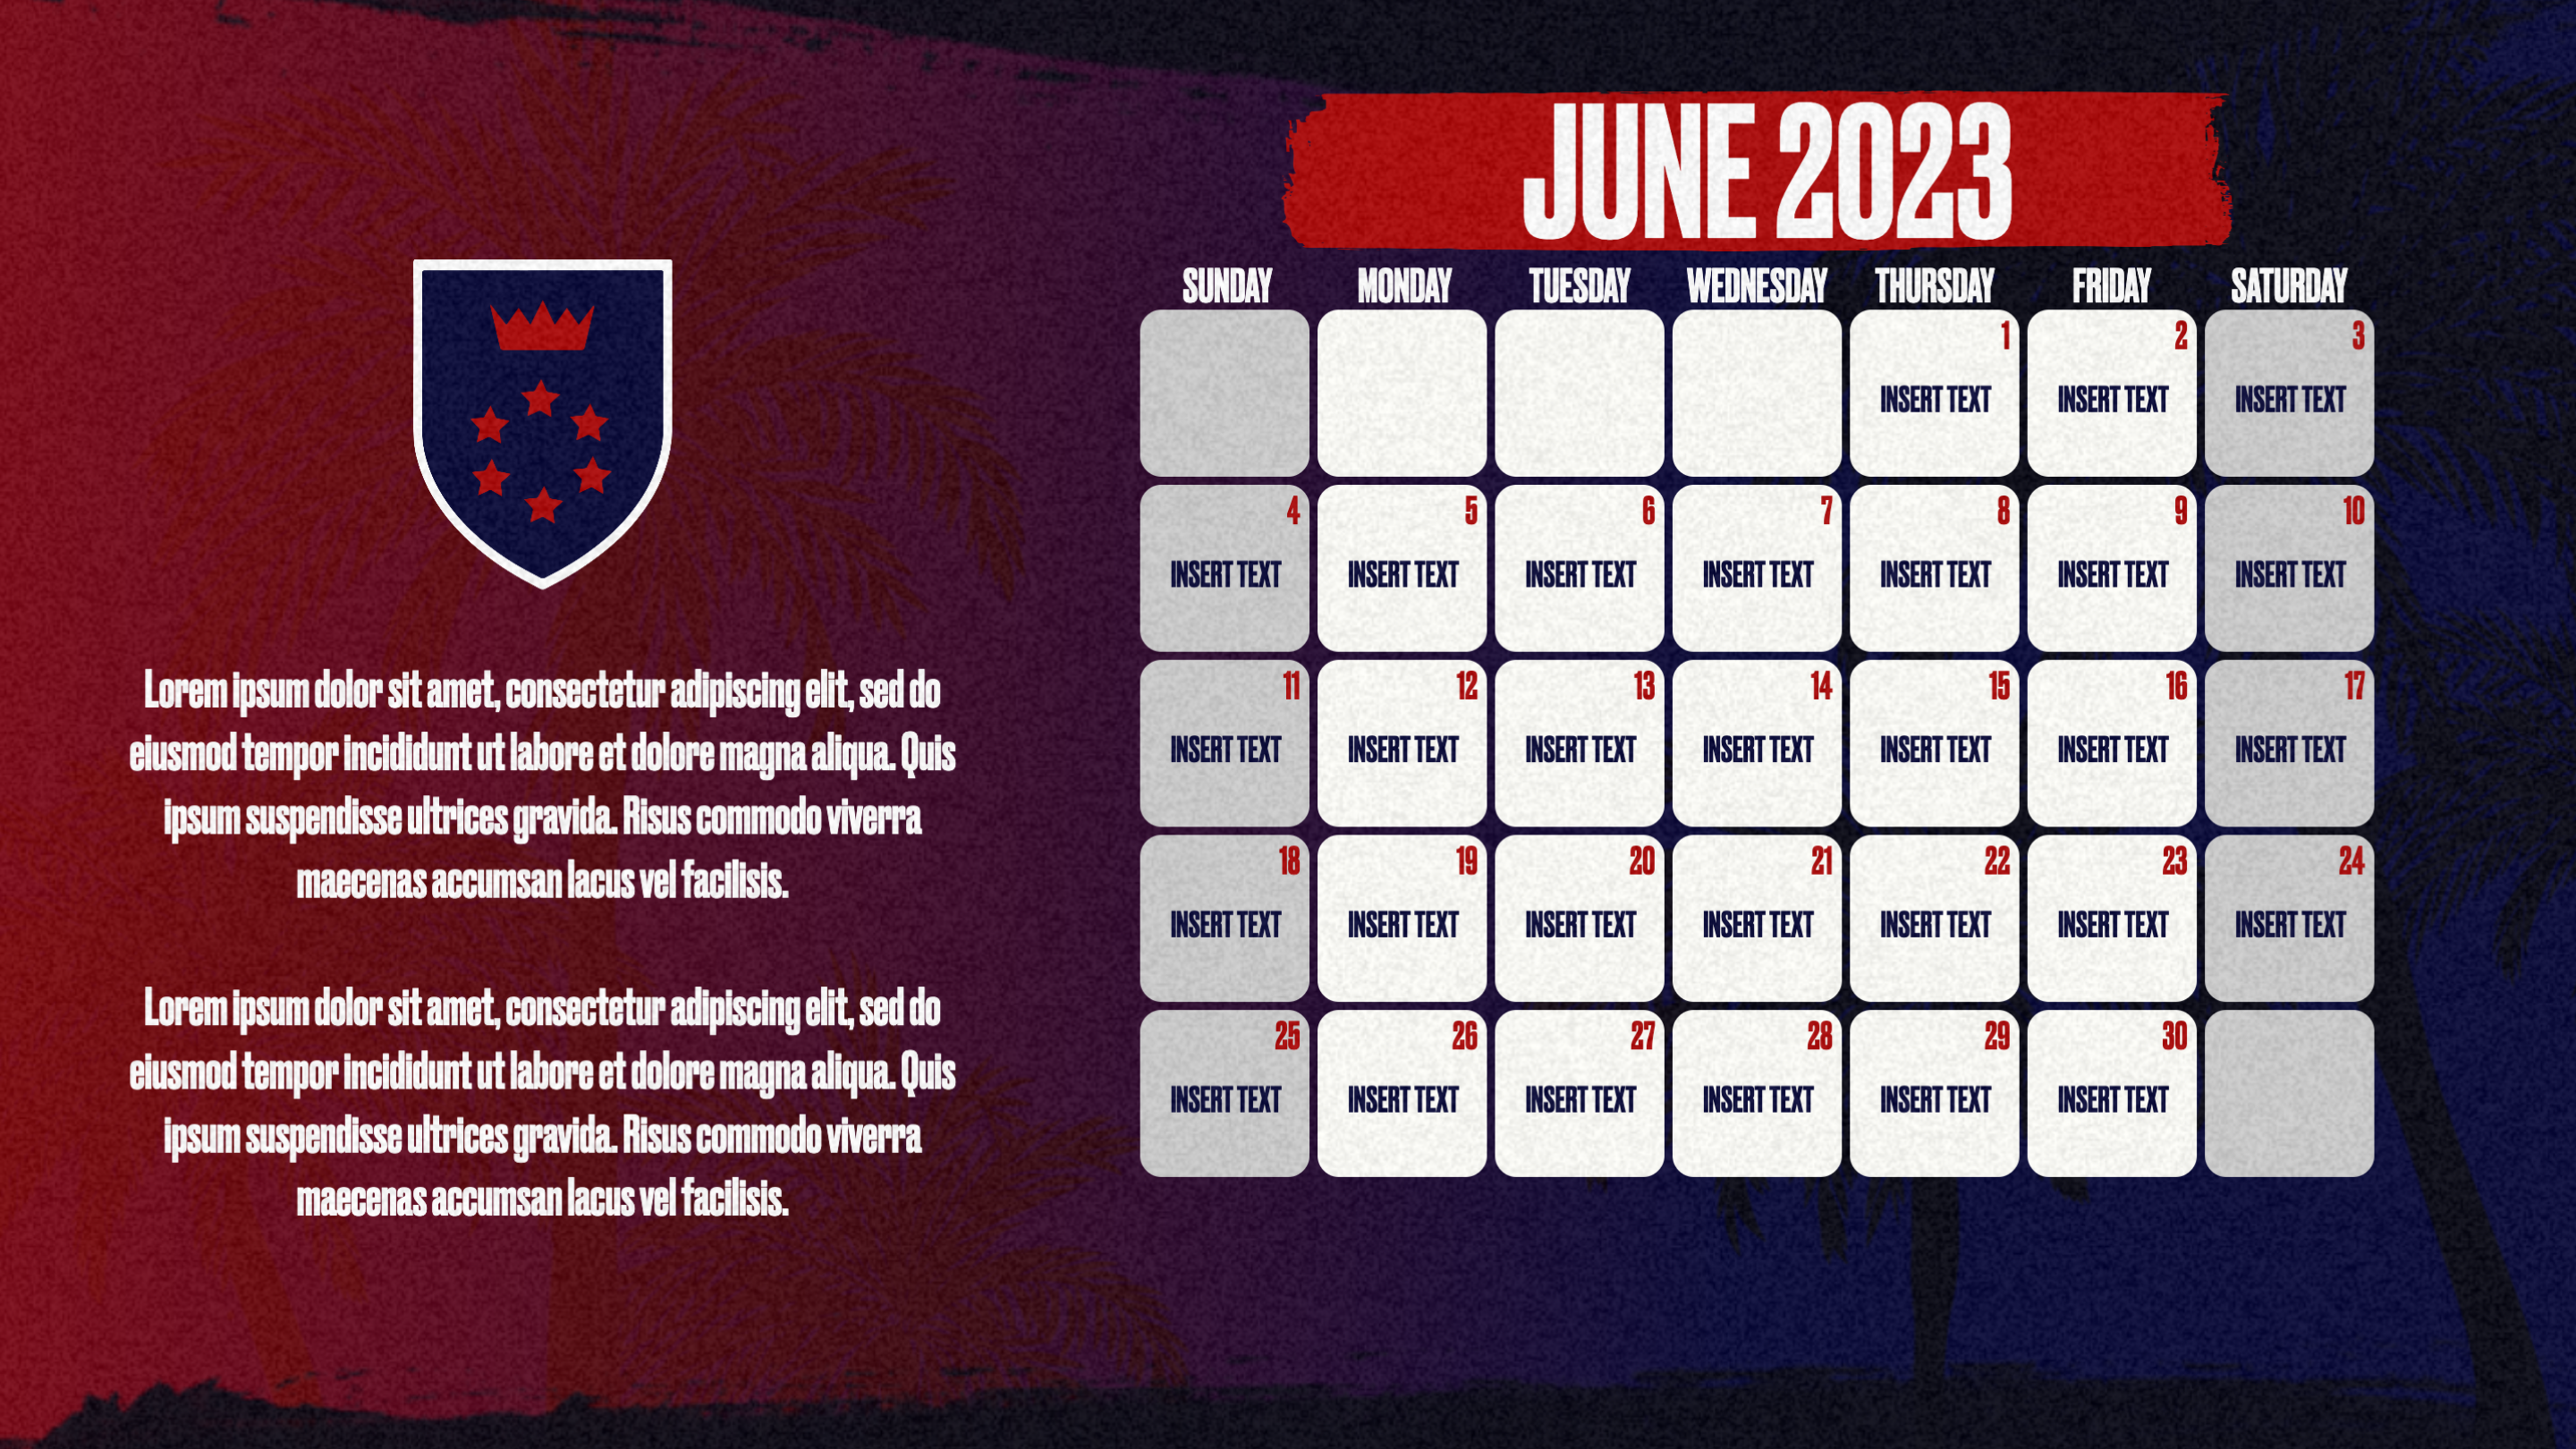 Gipper's 30-day calendar template showcasing a school logo, text, and monthly events calendar. Color scheme is blue, red, and white